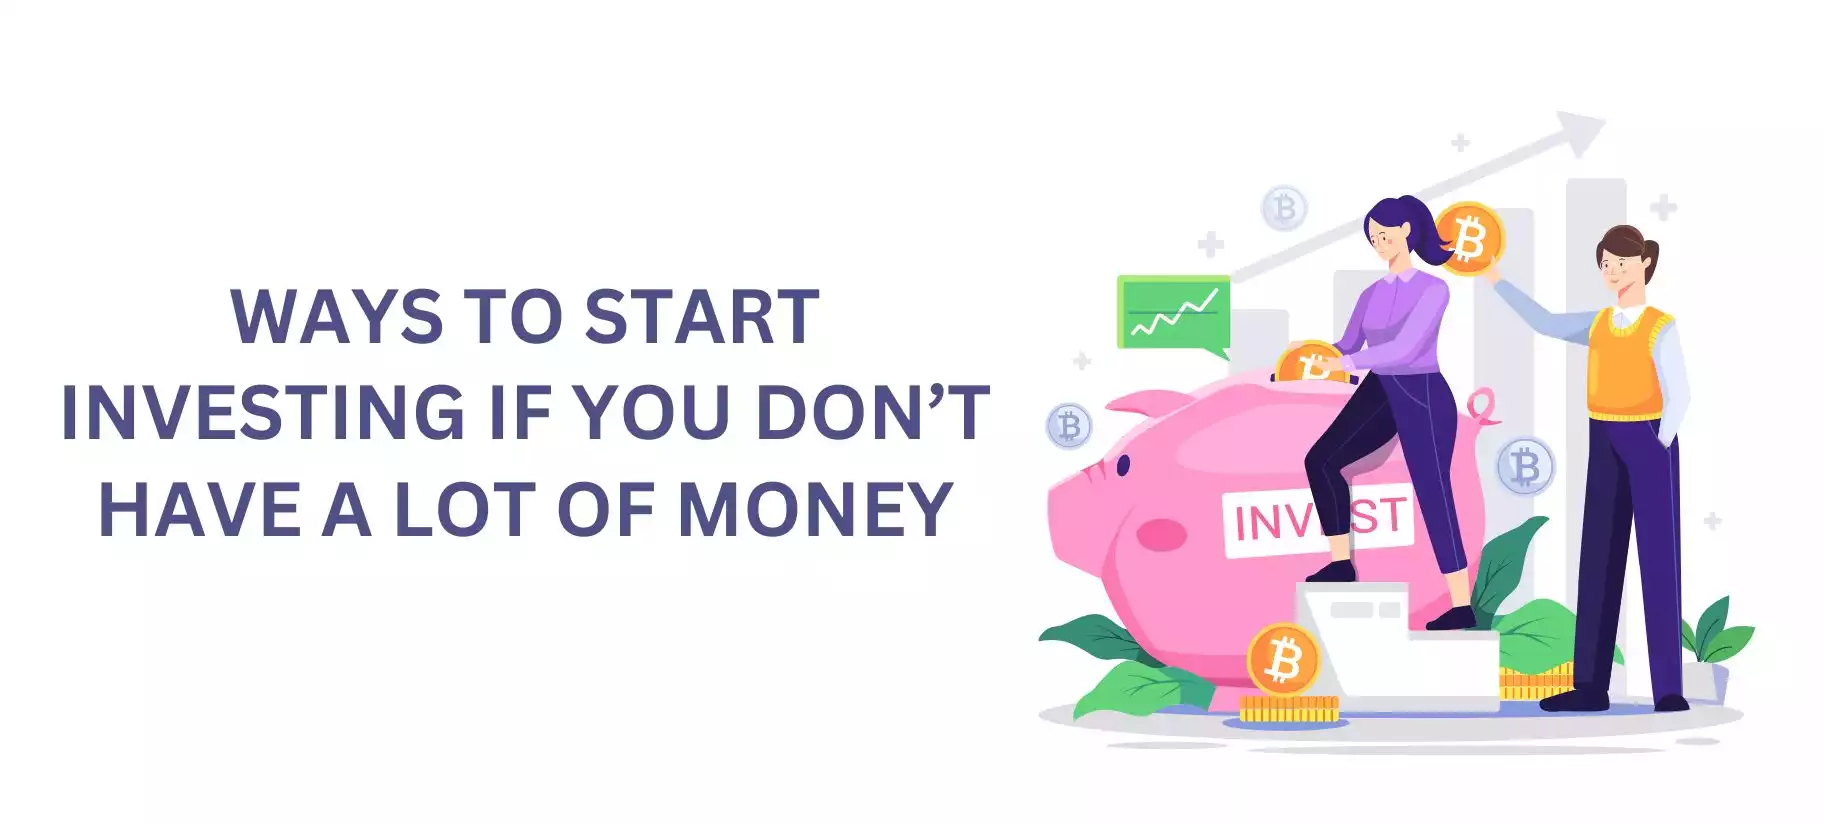 Ways to Start Investing if You Don’t Have a Lot of Money